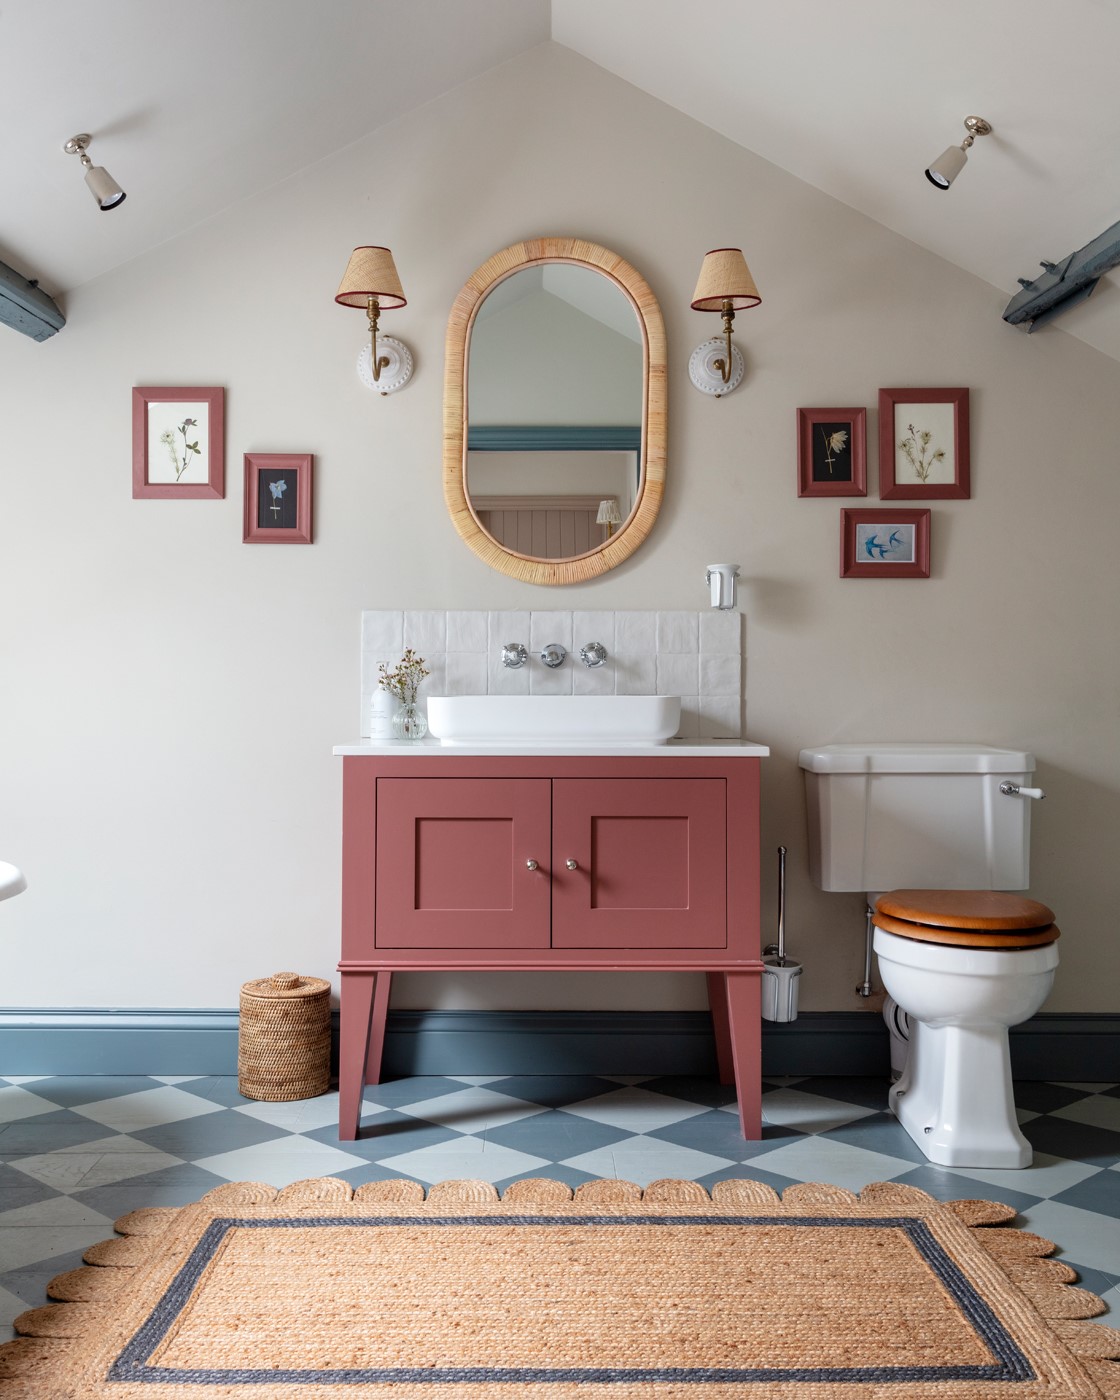 The Old Rectory - stylish basin and WC in the en-suite bathroom